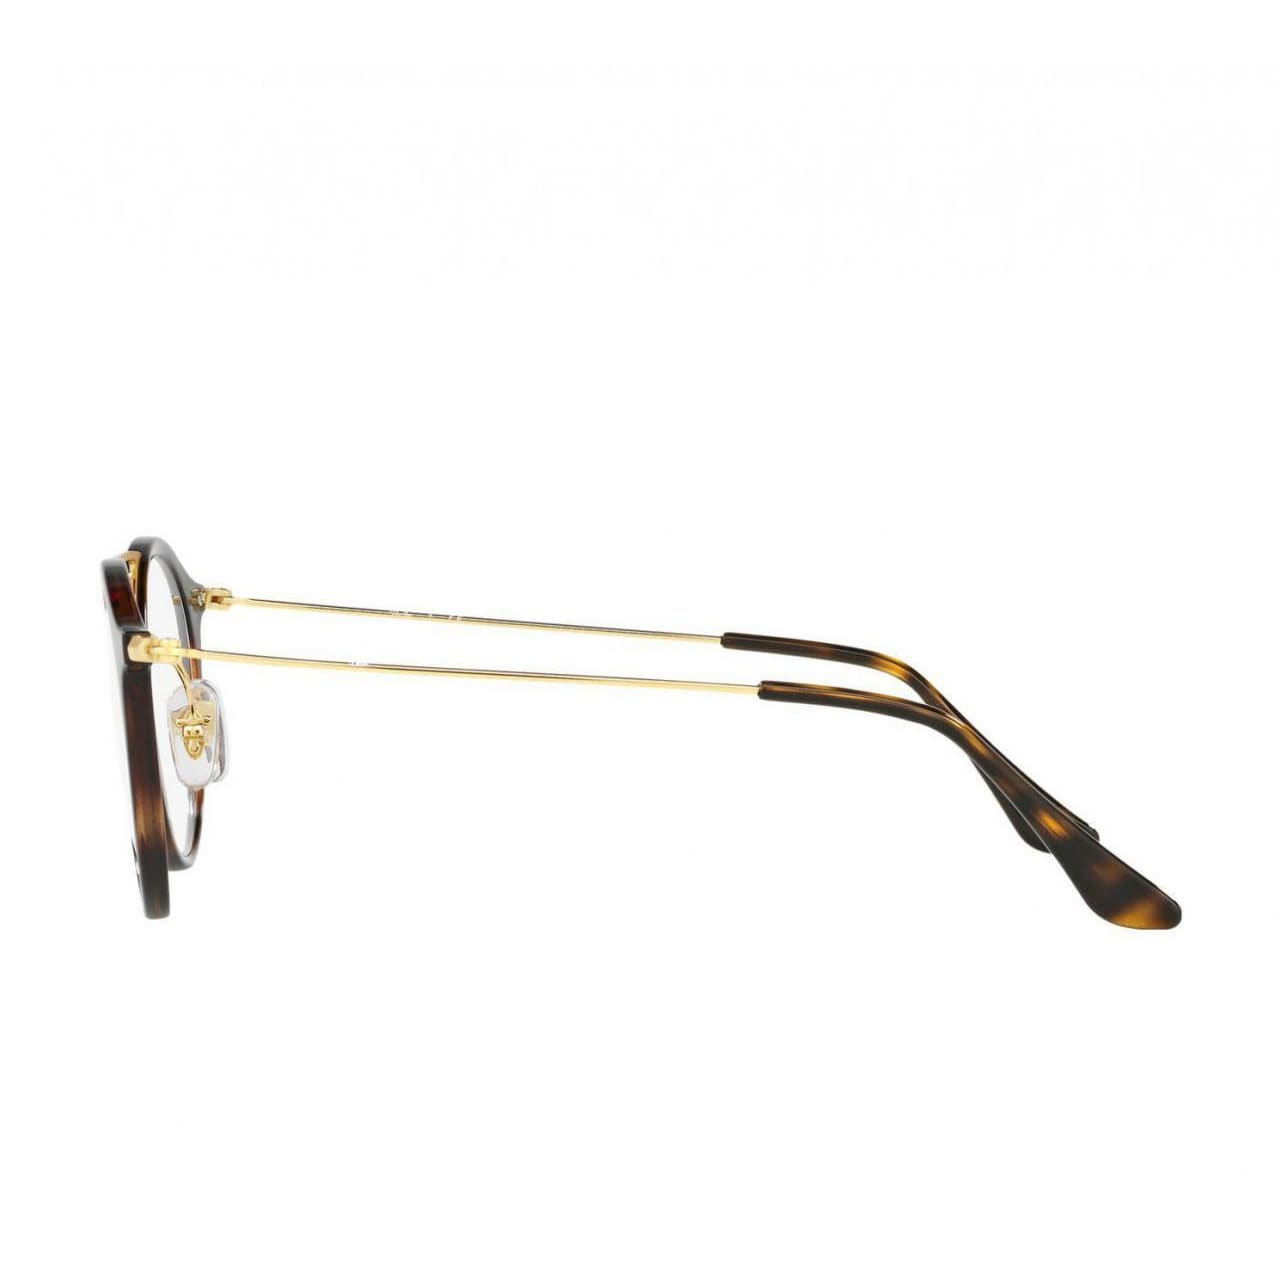 Ray-Ban RB7097 2012 Tortoise with Gold Full Rim Round Injected Eyeglasses Frames 8053672603644